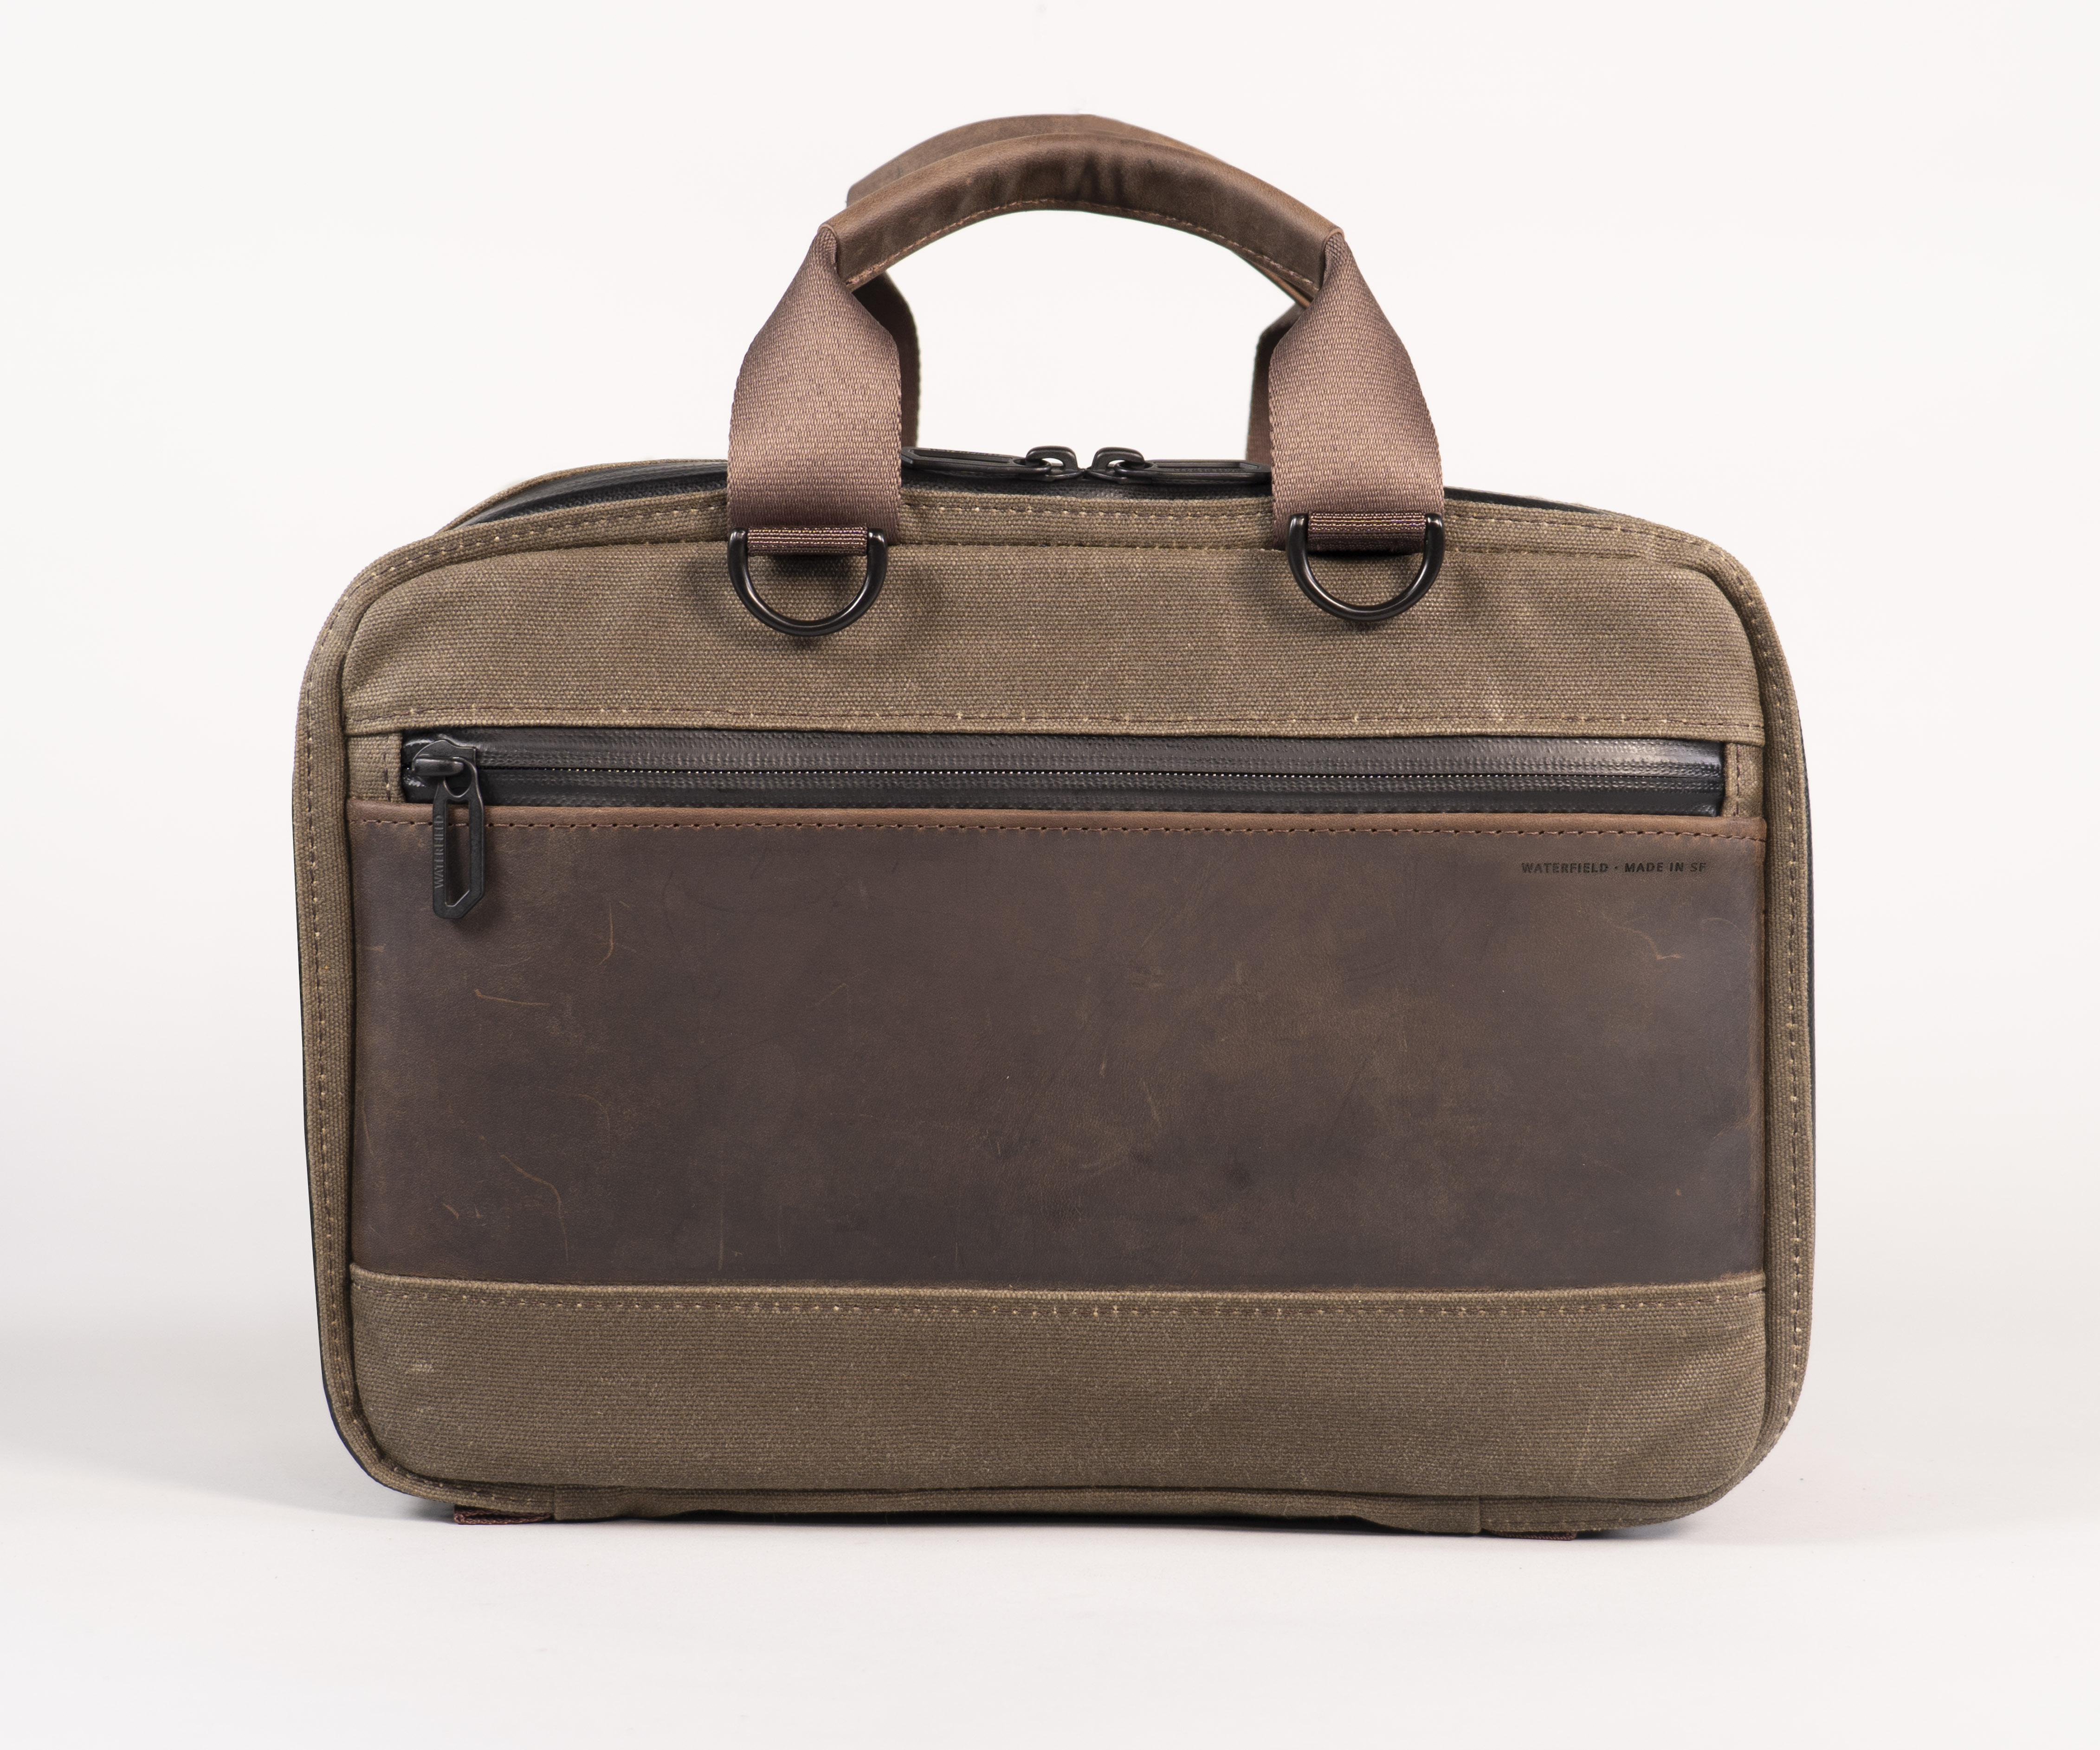 Mac Studio Travel Bag in waxed canvas and full-grain chocolate leather